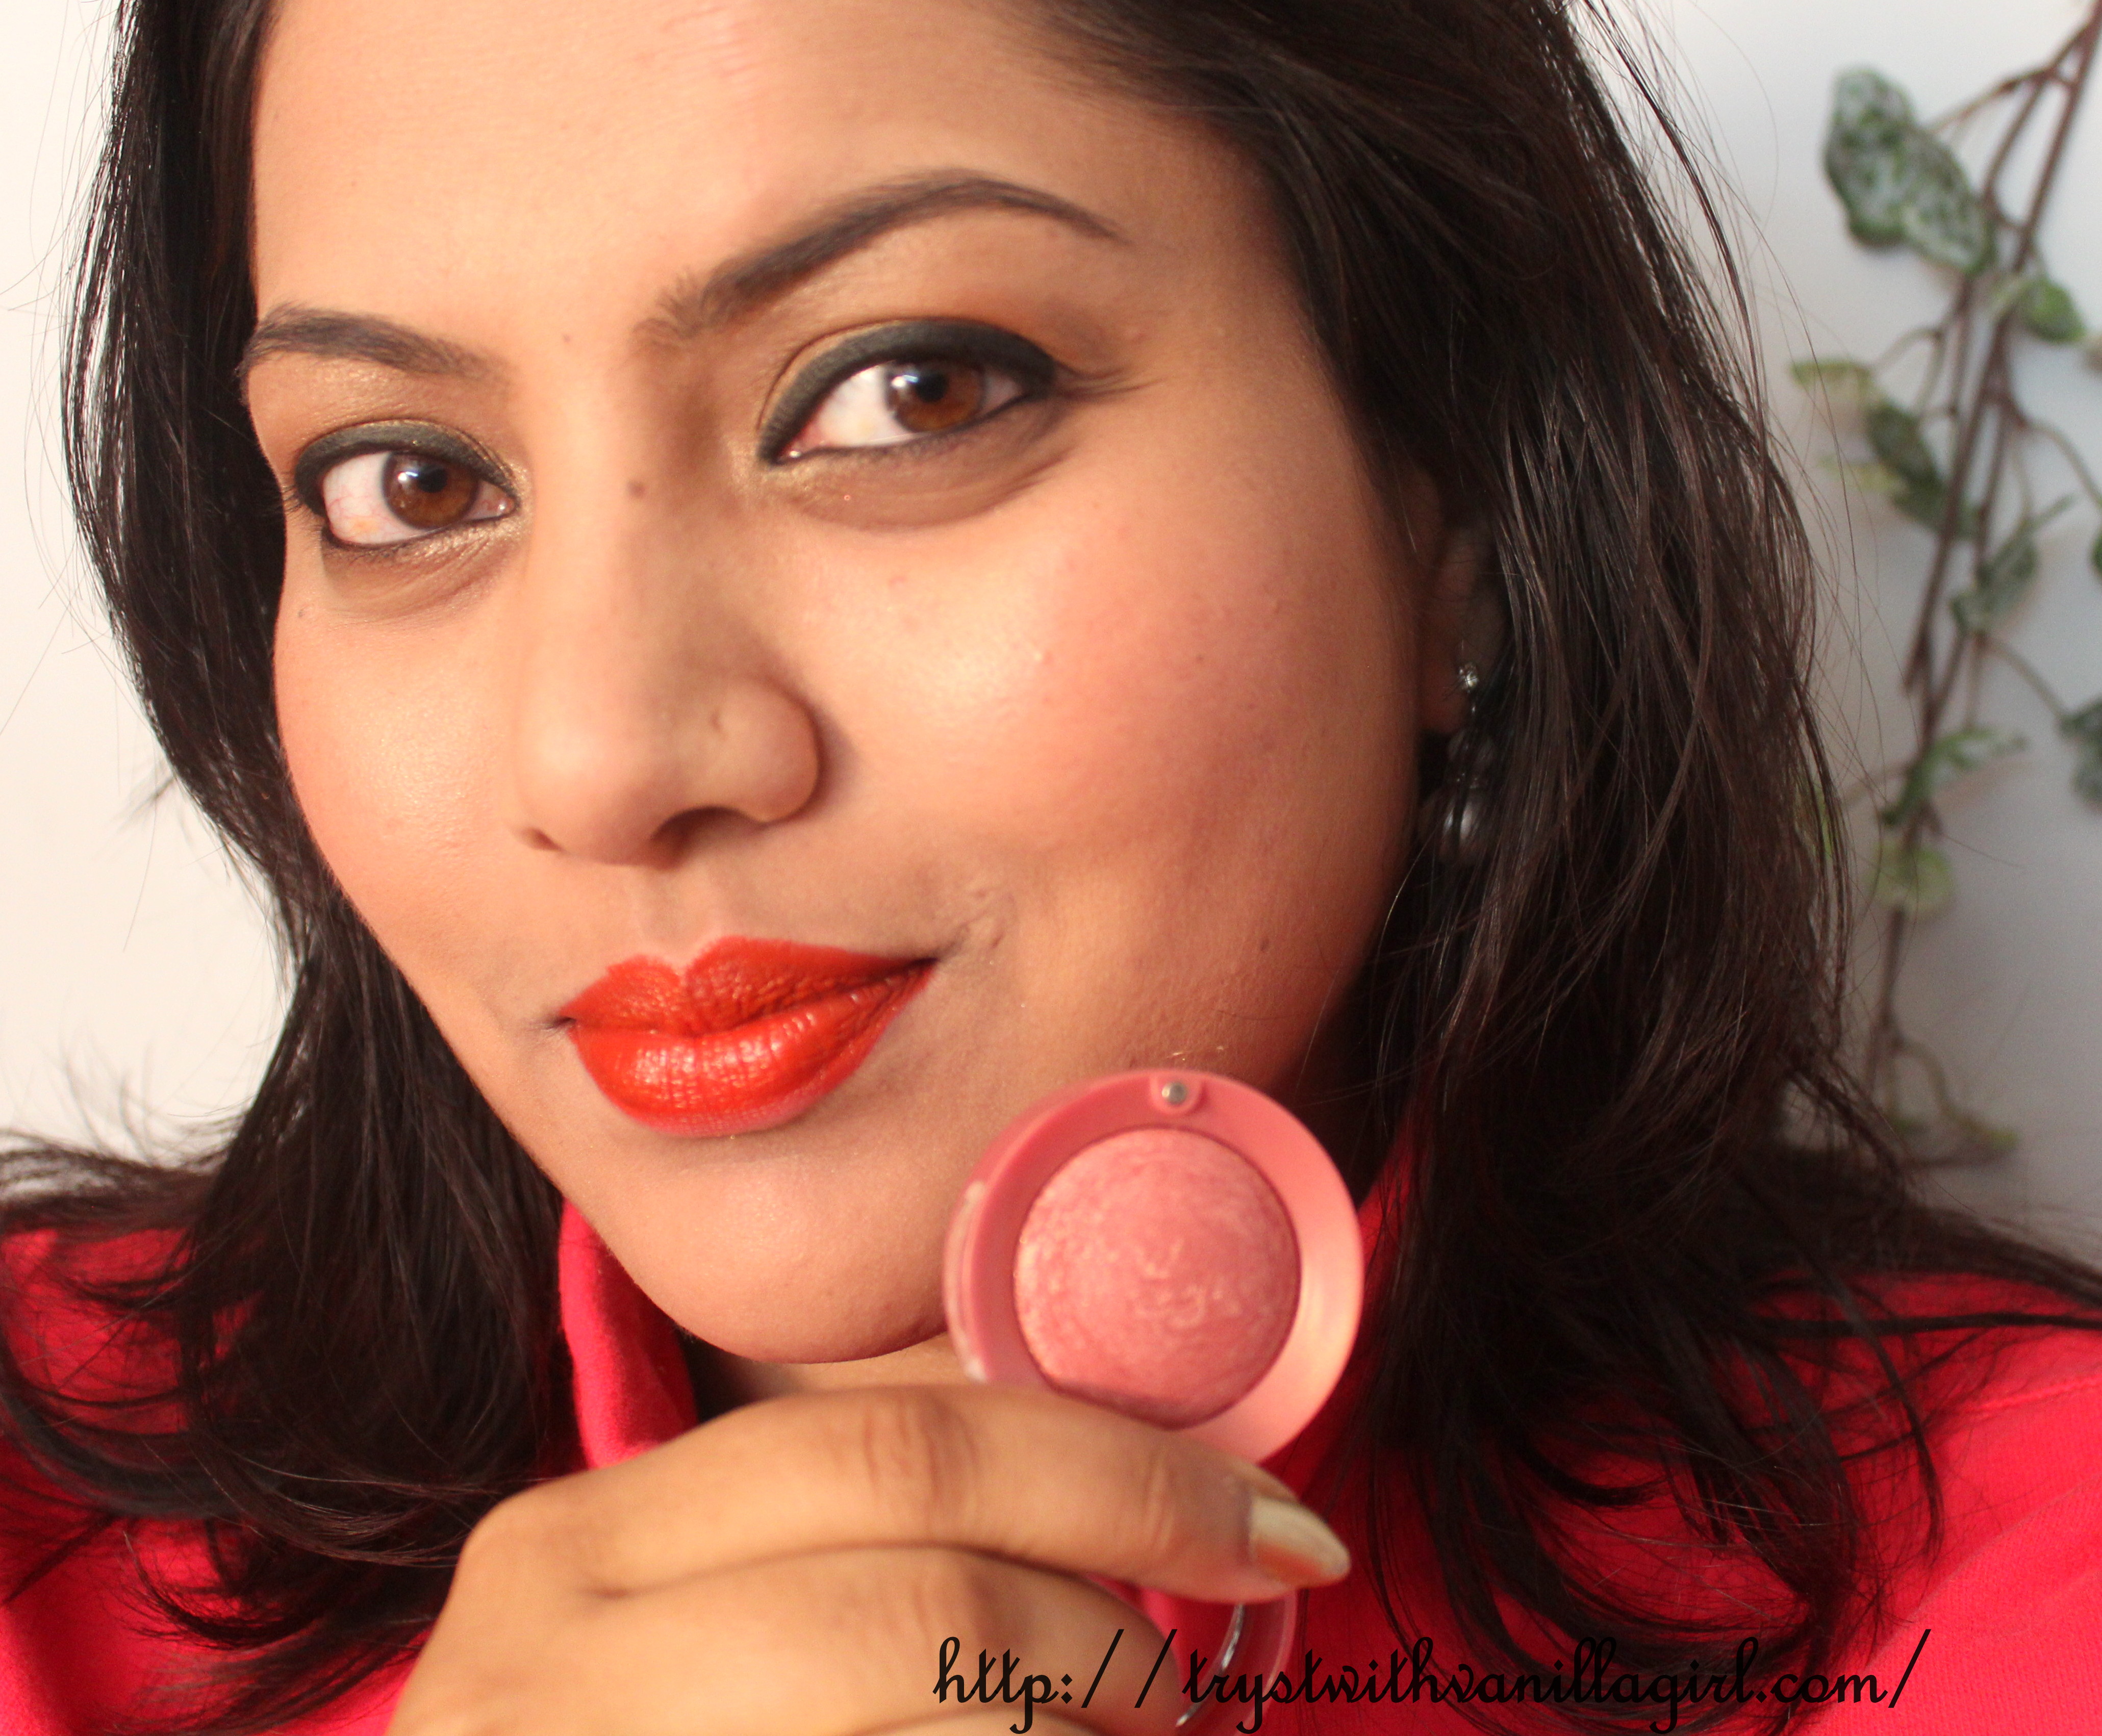 Bourjois Little Round Pot Blusher Lilas D'or 33 Review,Swatch,Photos,FOTD